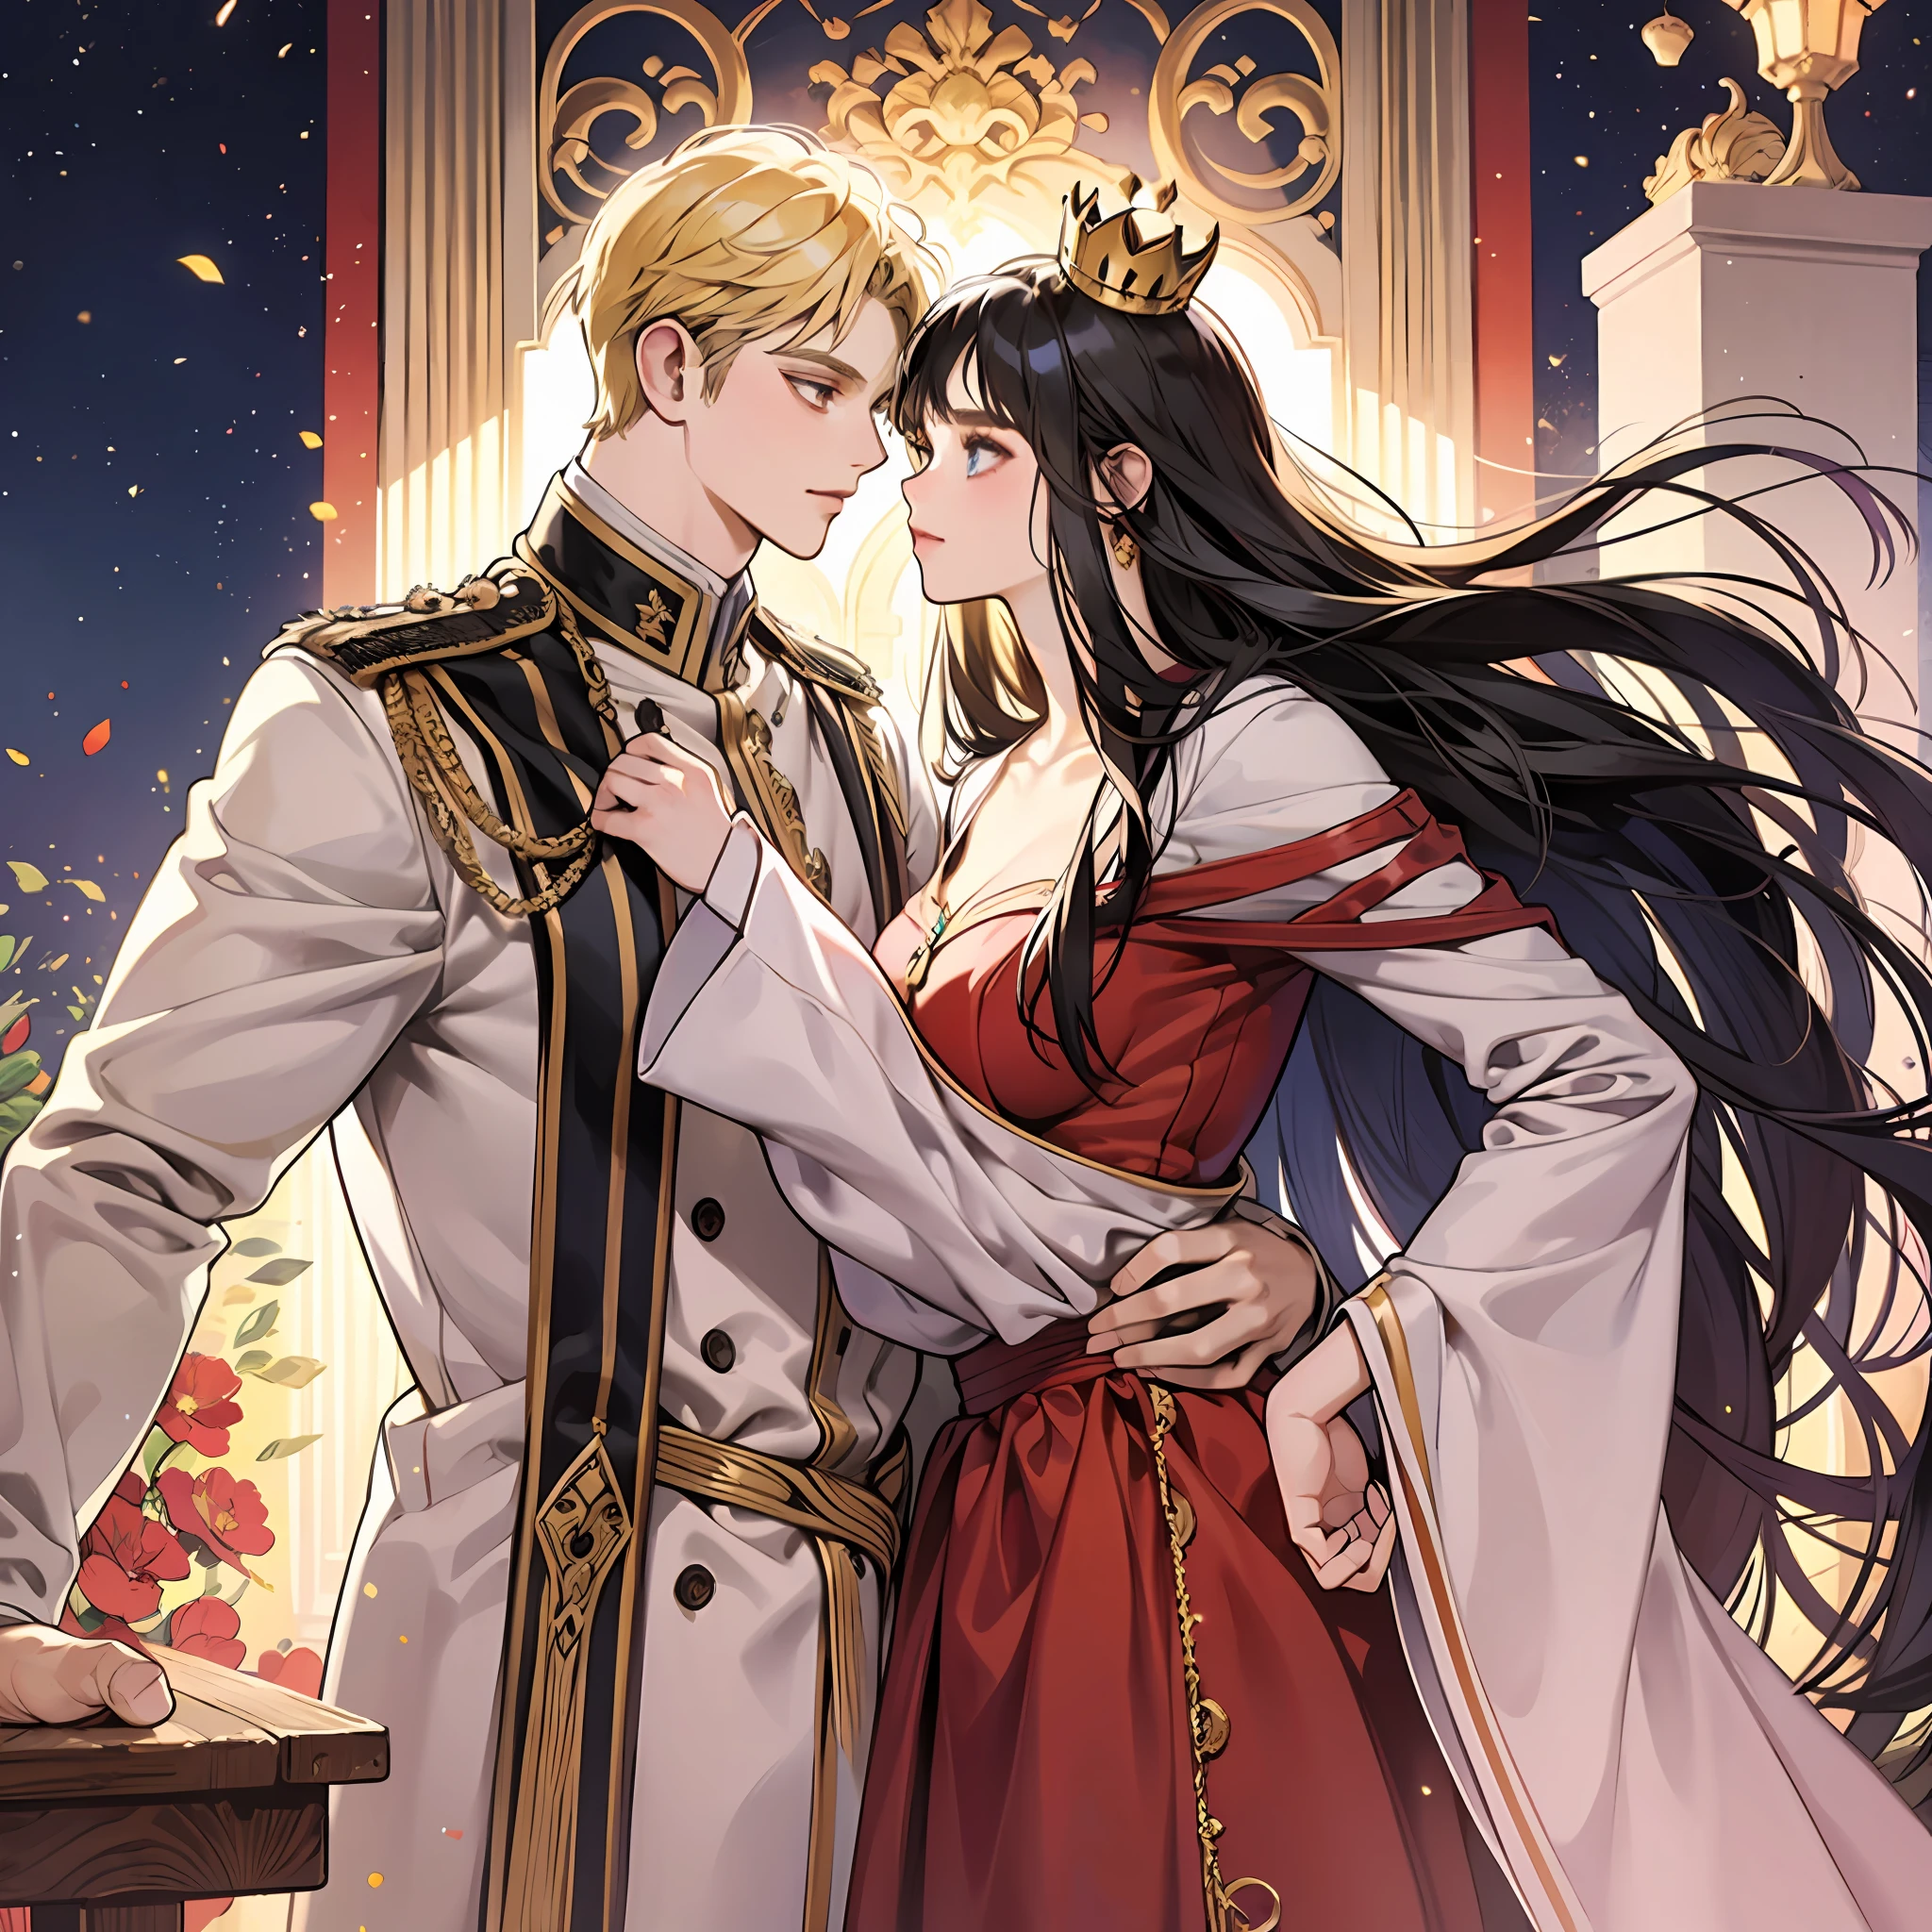 blonde man, dark blue hair girl, naruhina, throne, masterpiece, couple, standing, royalti, nobility, (((crowns))), king, queen, looking into each other eyes, romantic